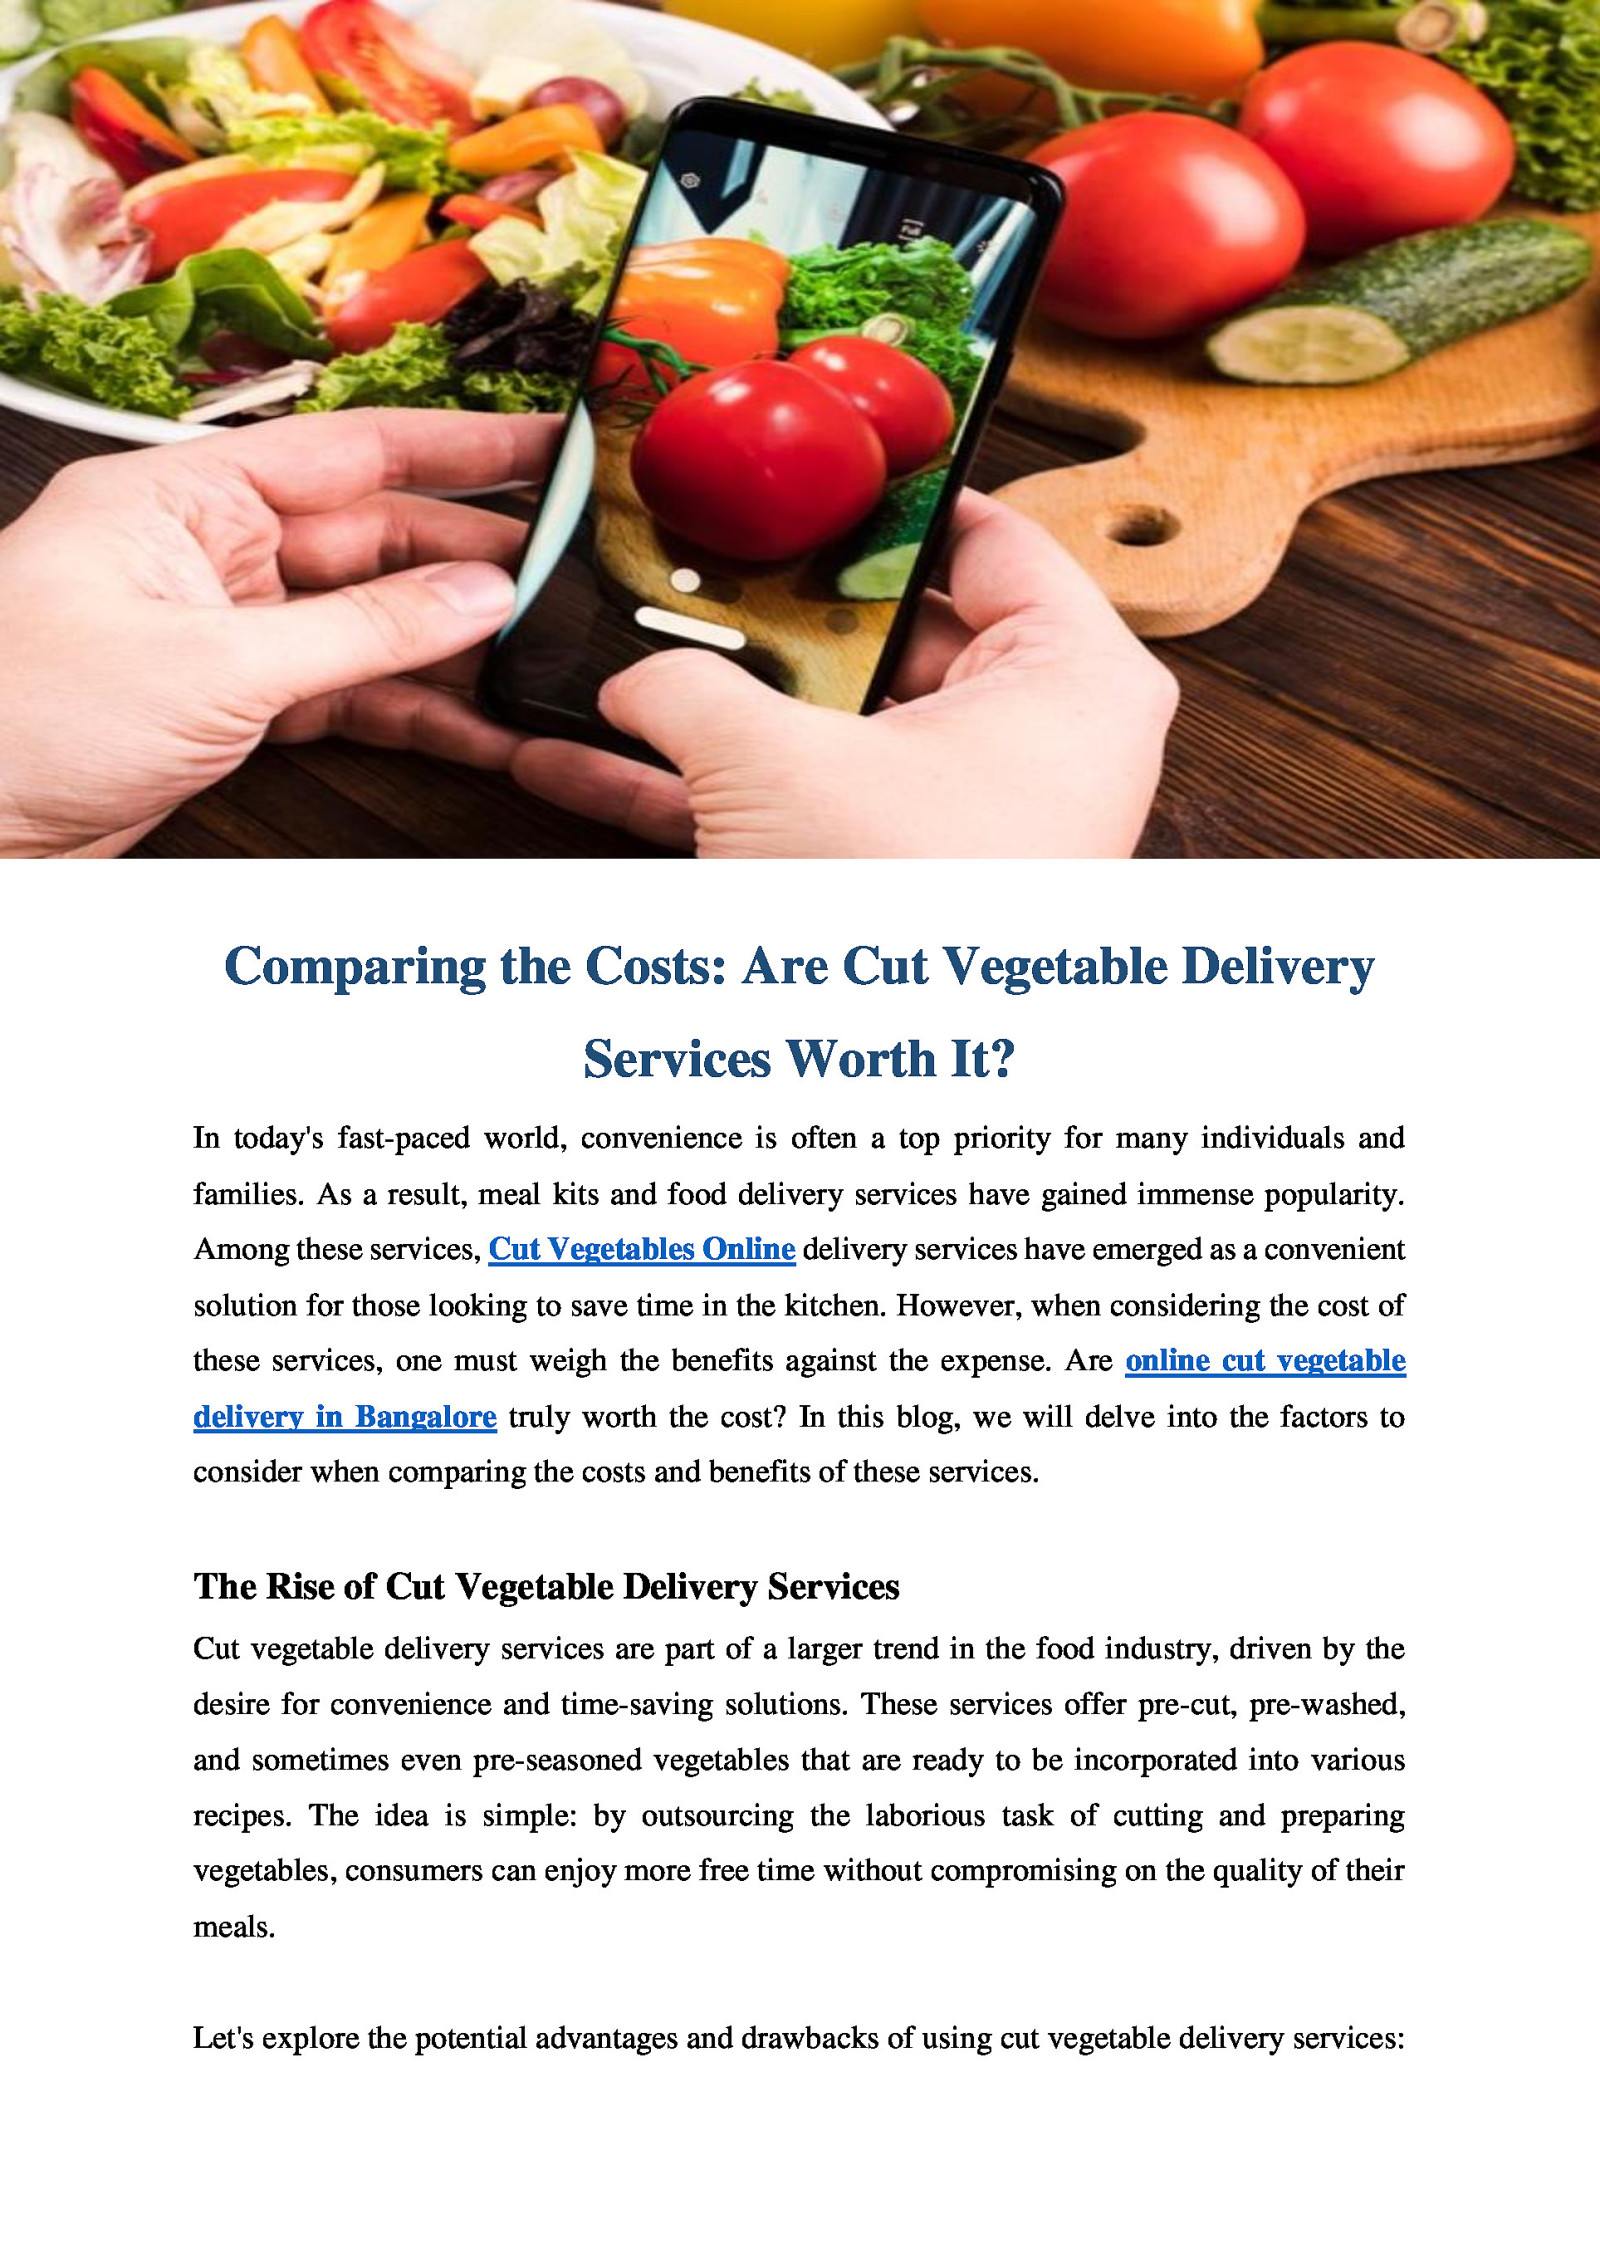 Comparing the Costs: Are Cut Vegetable Delivery Services Worth It?